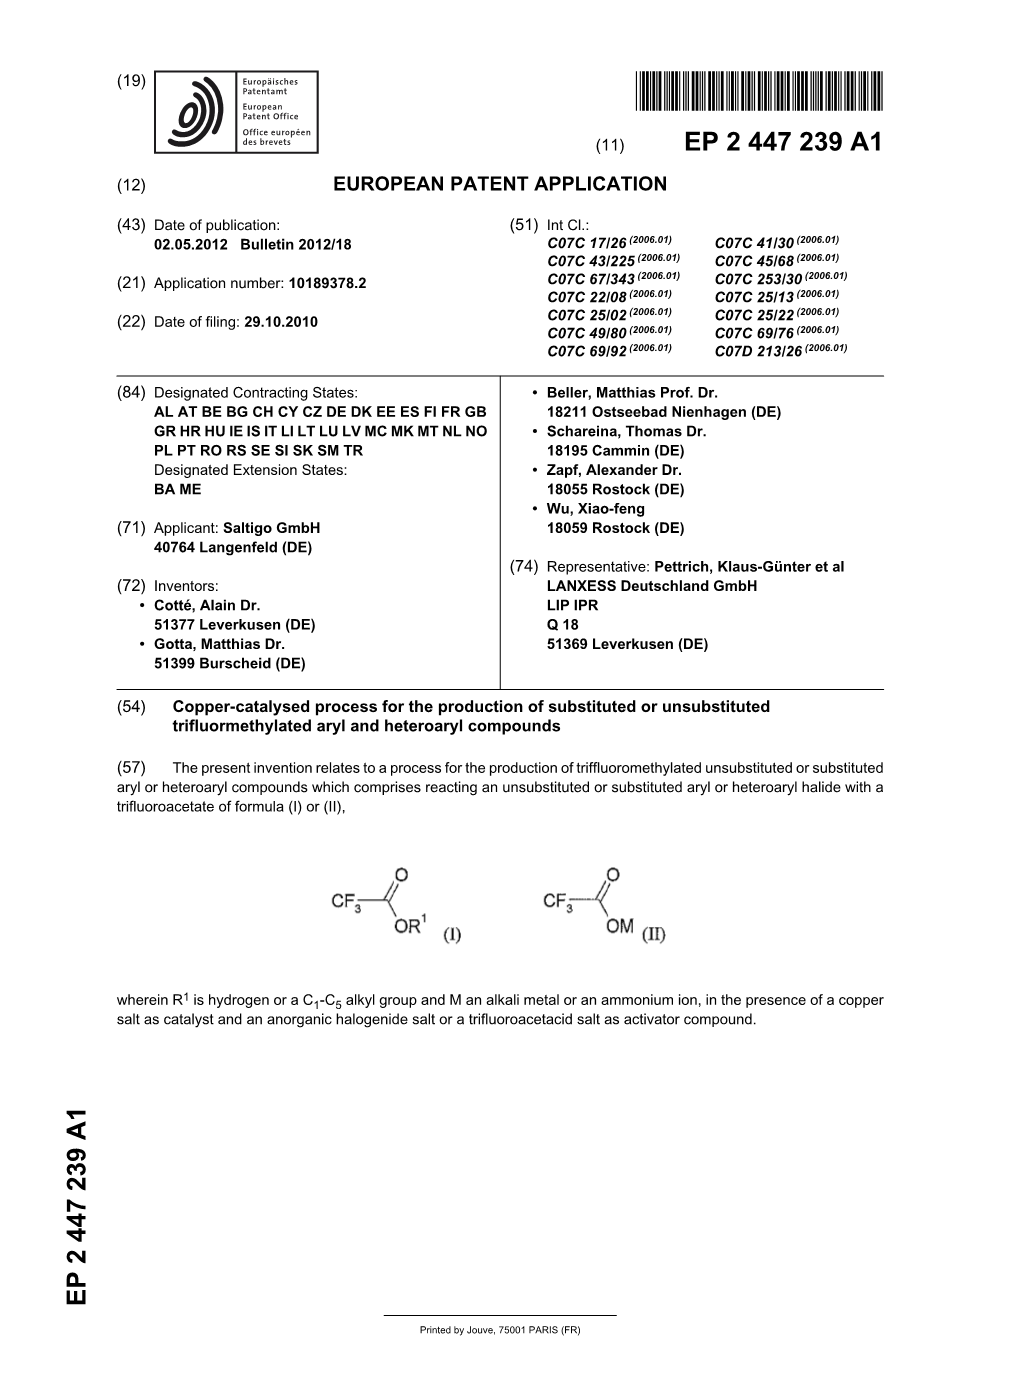 Copper-Catalysed Process for the Production of Substituted Or Unsubstituted Trifluormethylated Aryl and Heteroaryl Compounds